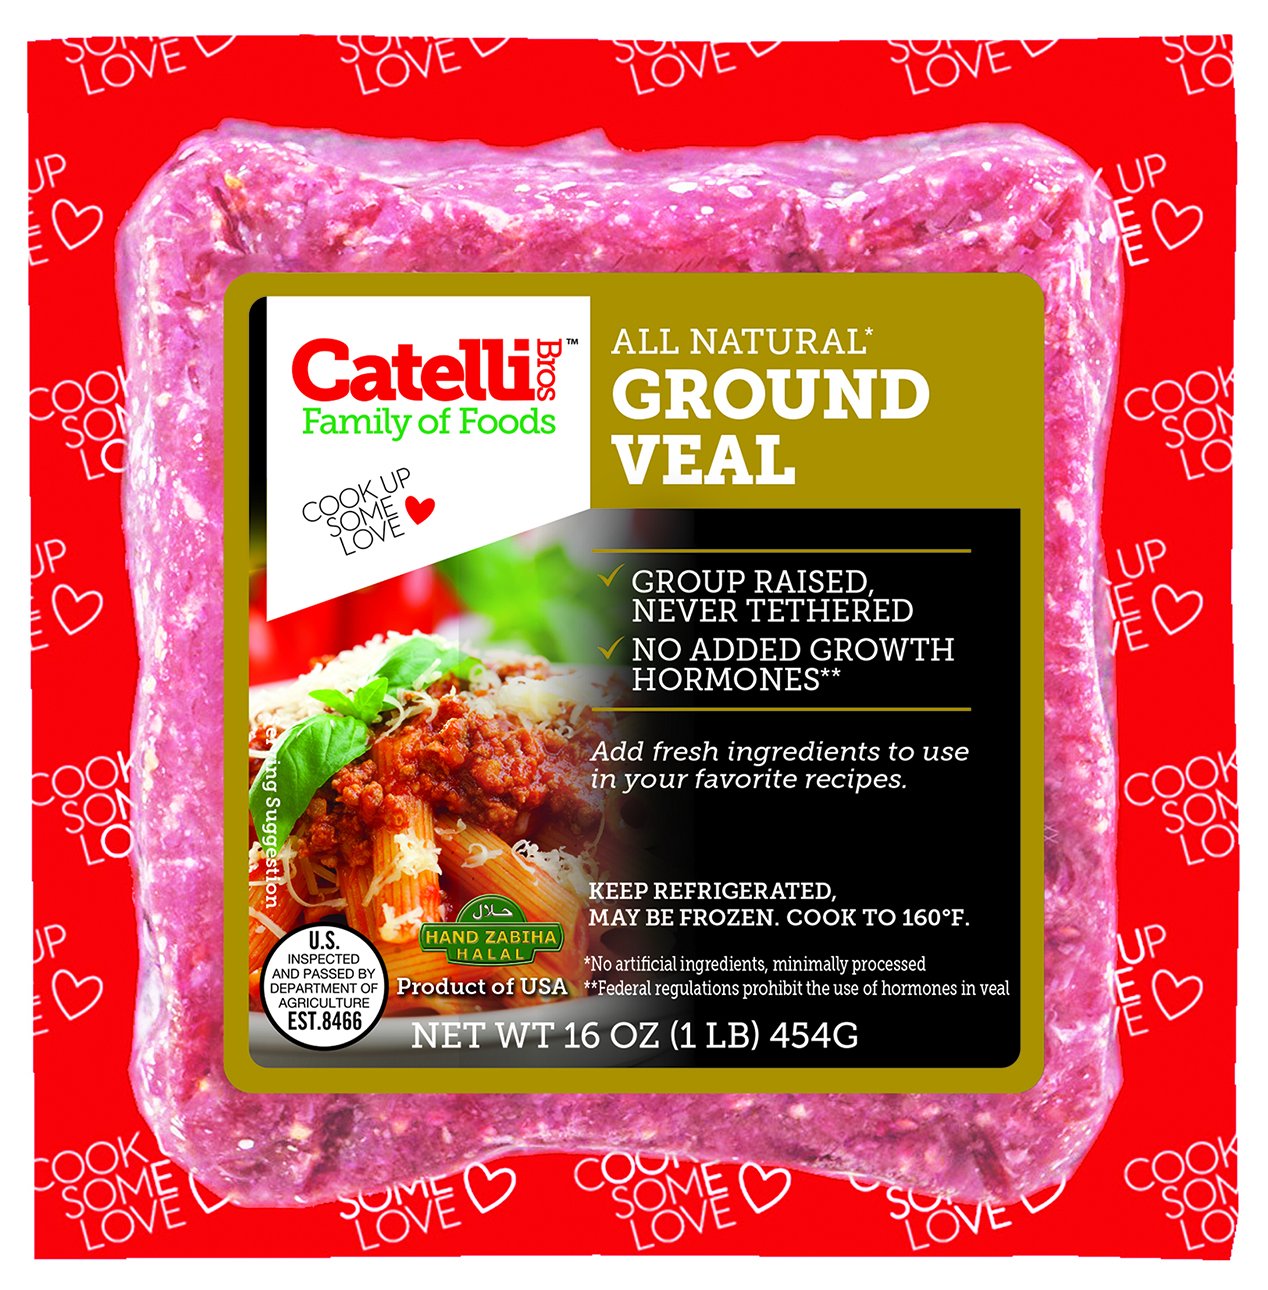 All-Natural Ground Veal